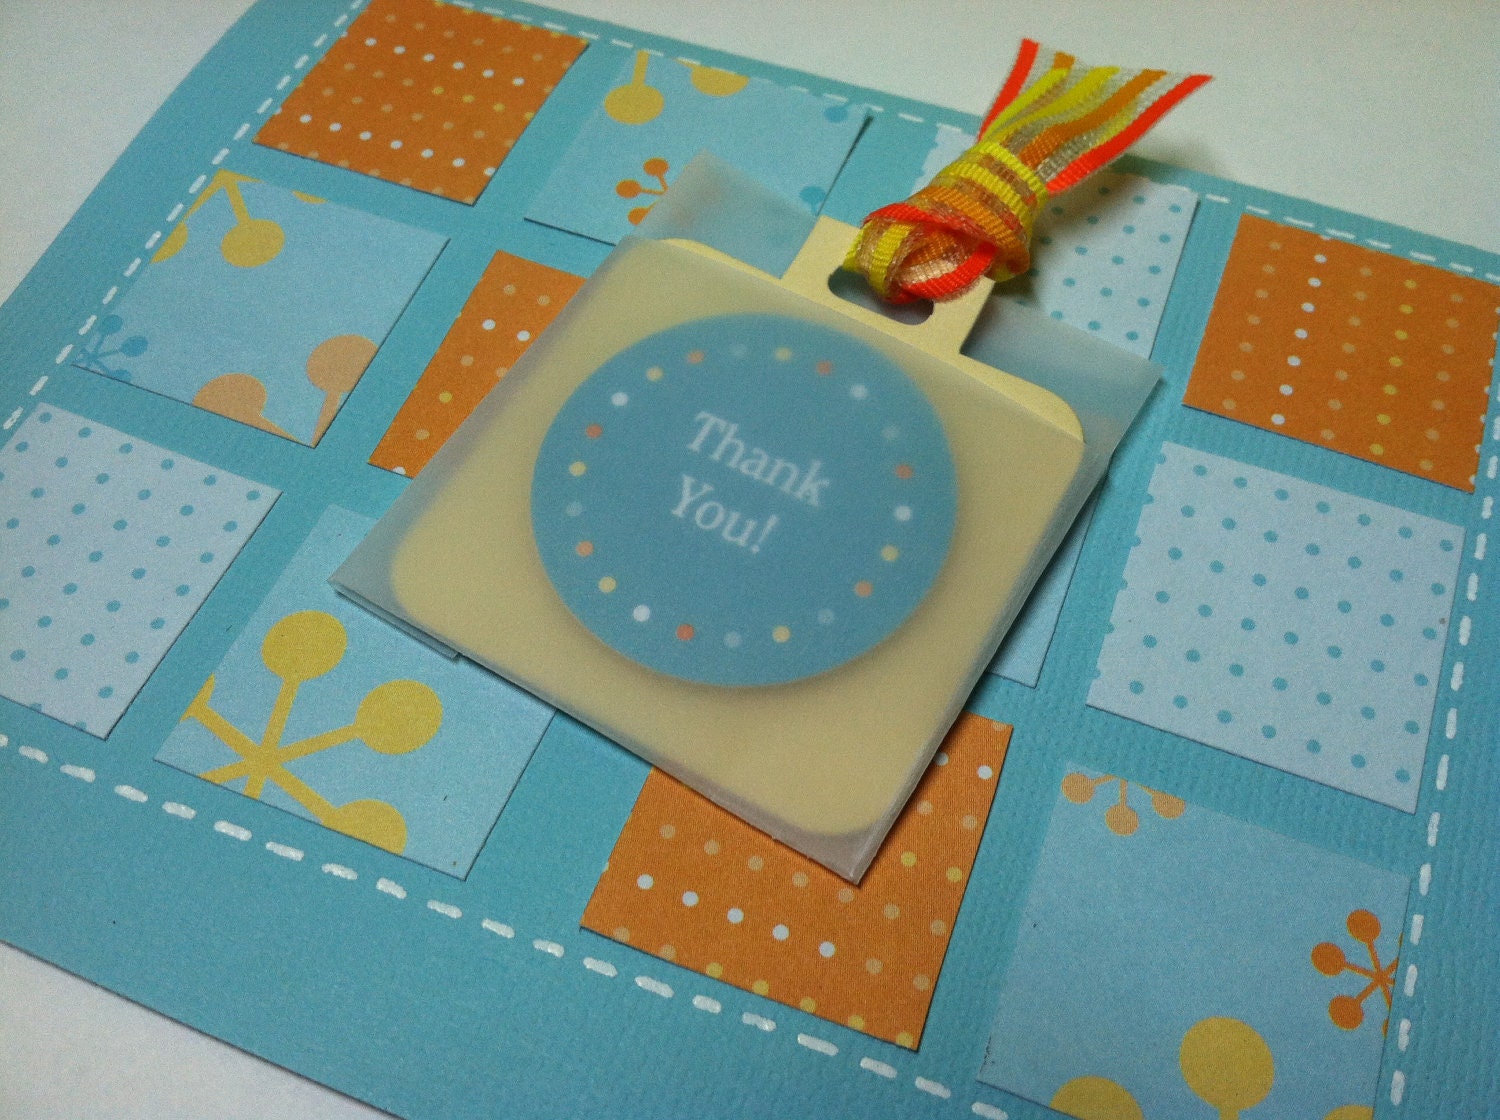 Thank You Squares and Tag Card